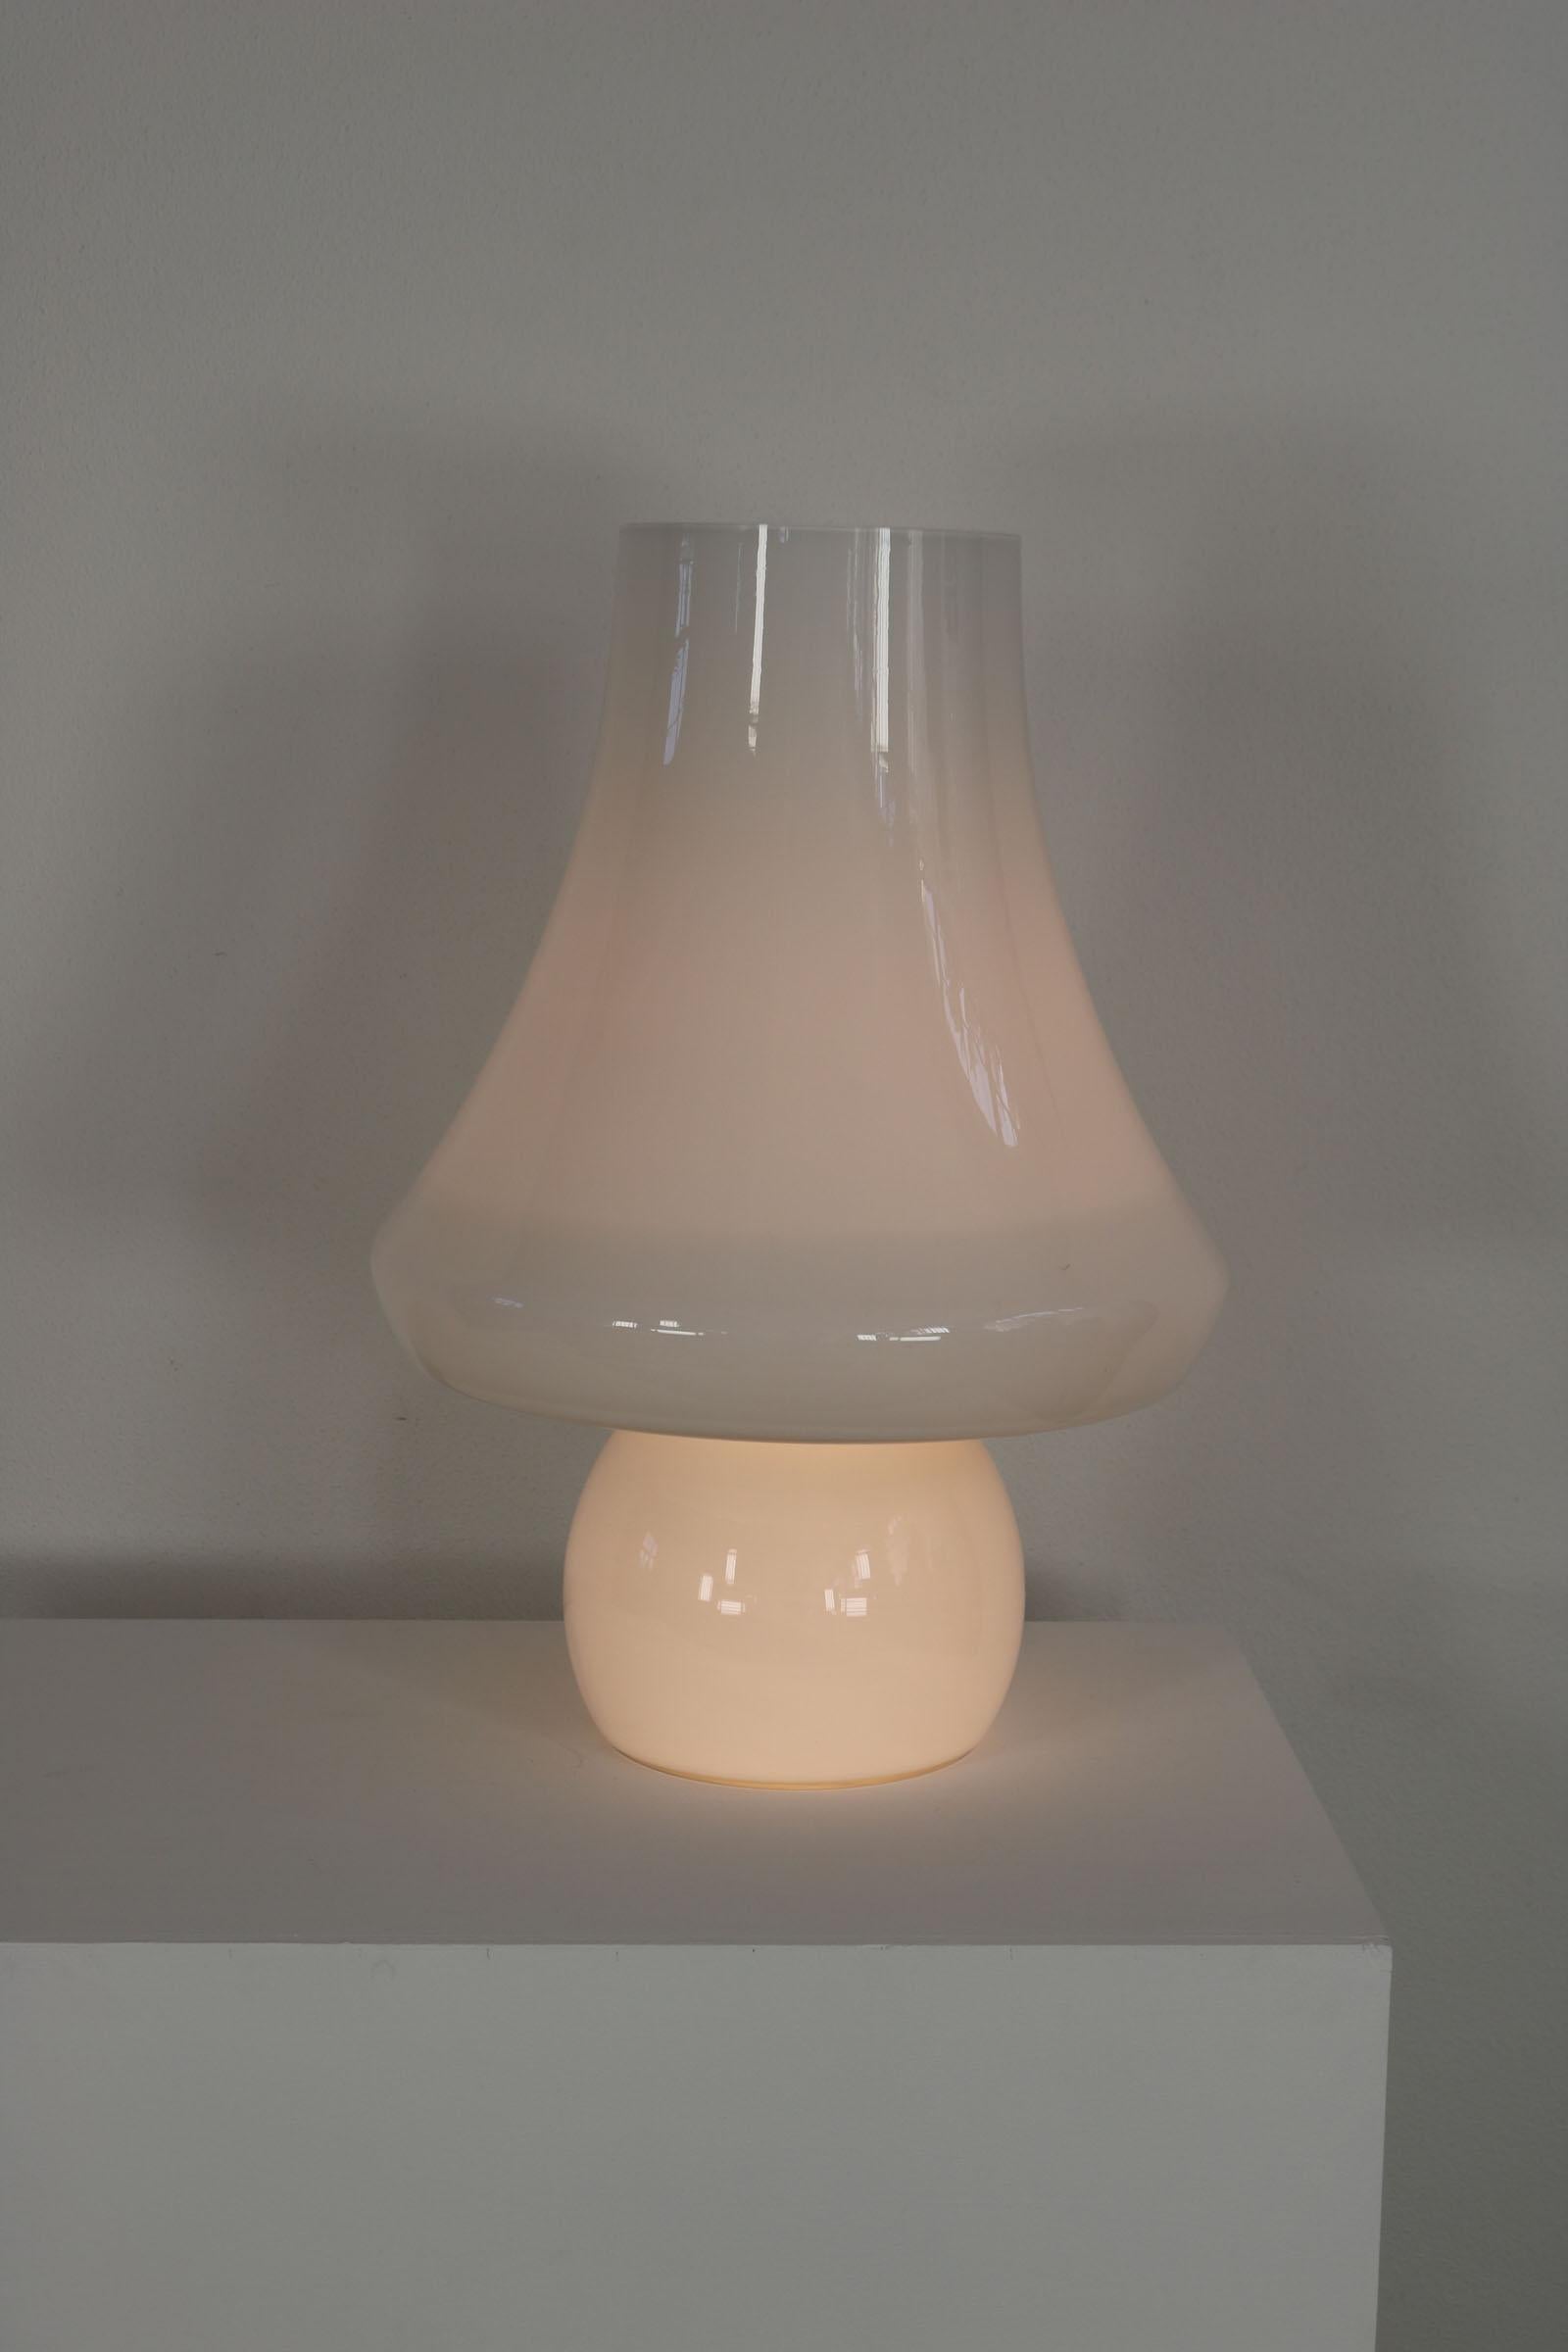 Elegant large table lamp made of white Murano glass with mushroom head, manufactured by De Majo in the 1960s-1970s. 

De Majo IIluminazione founded its first glassworks in 1947 on the island of Murano, Italy.